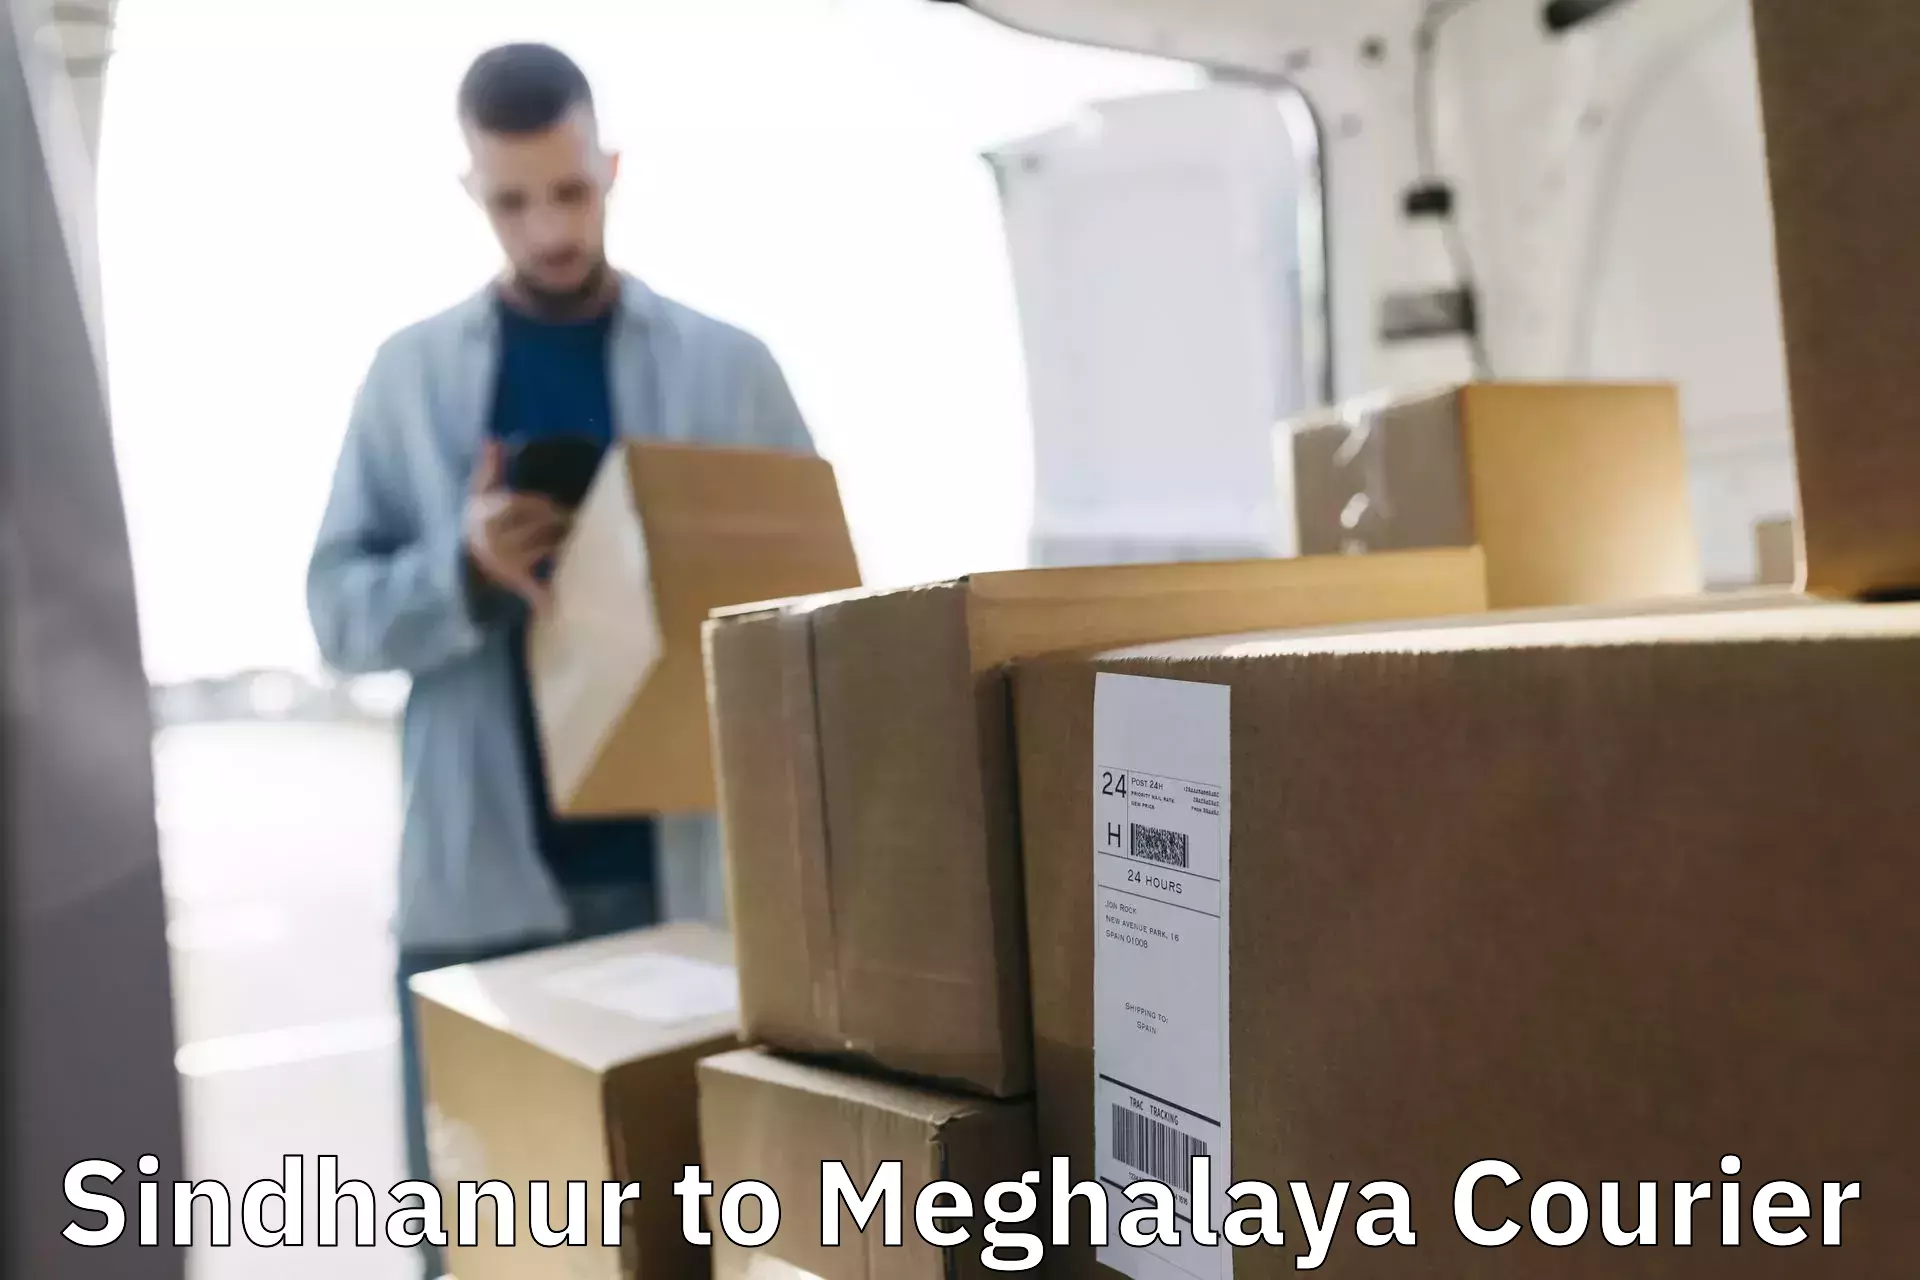 Professional courier services Sindhanur to Meghalaya